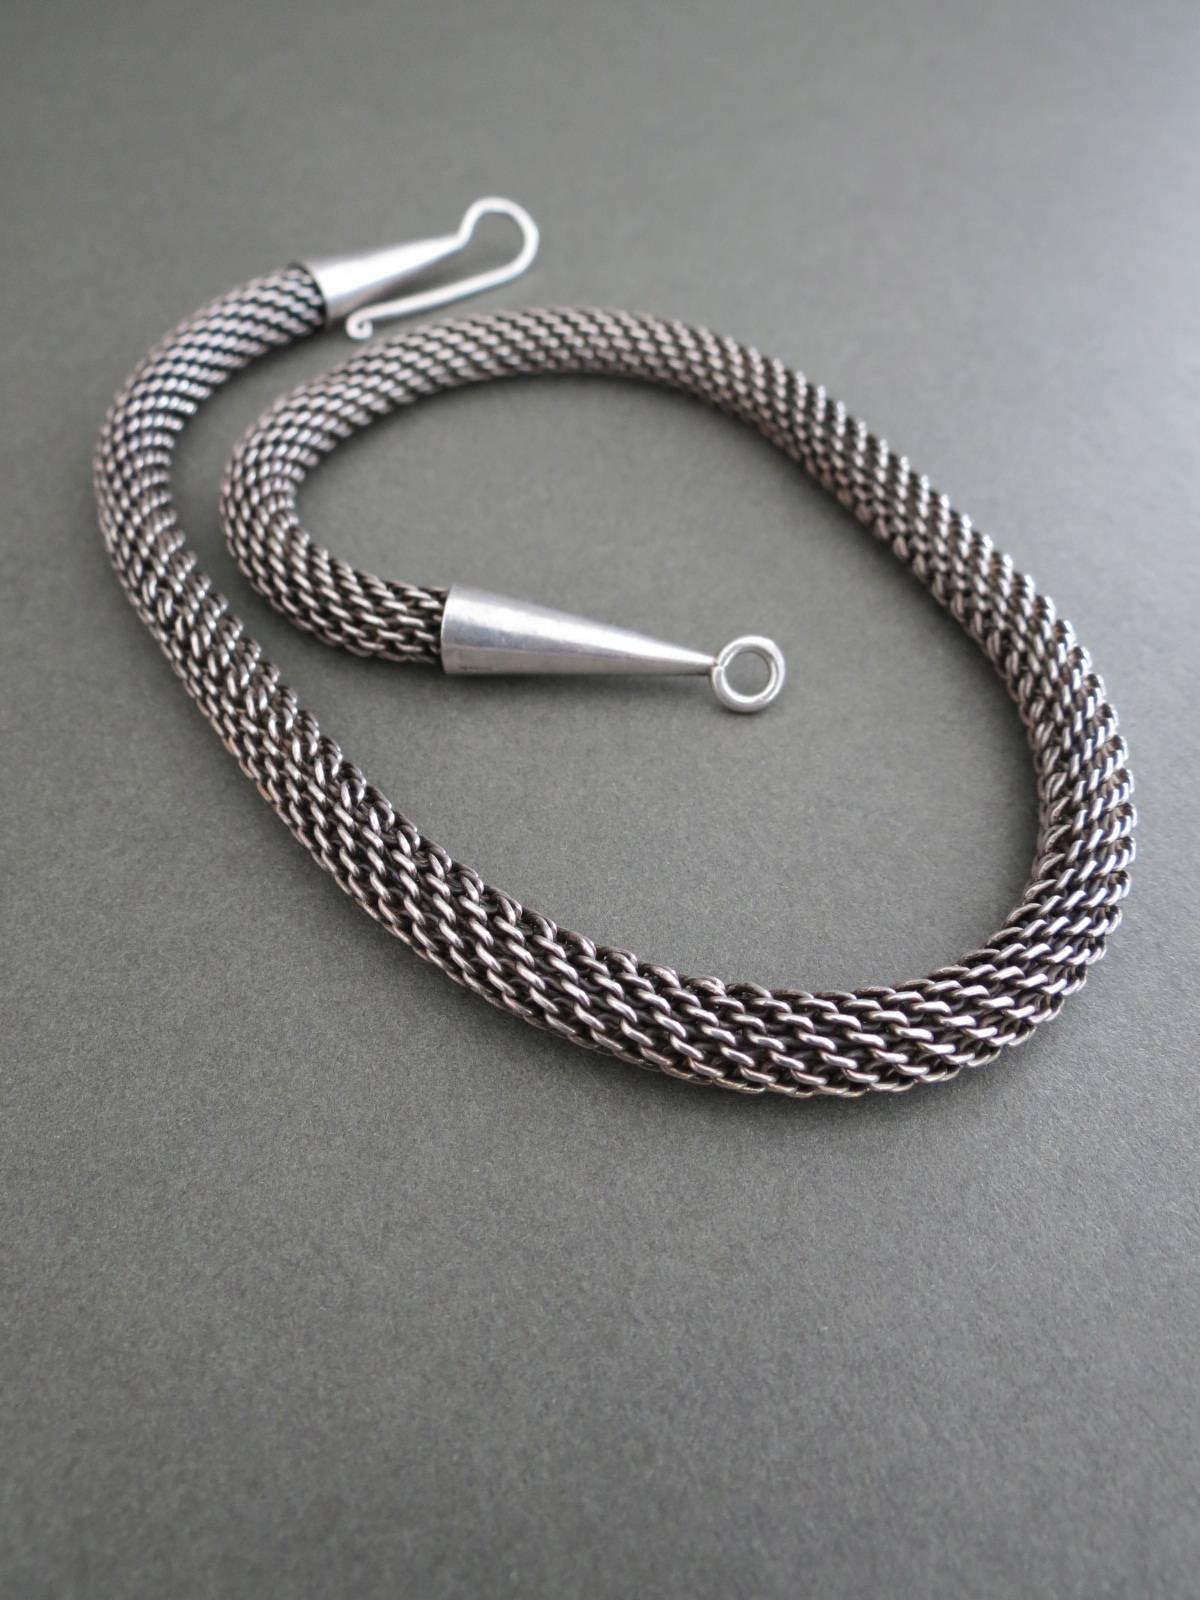 Vintage Sterling Silver Danish Snakeskin Mid Century Necklace. Lovely Scandinavian design and hallmarked on the clasp. 
Item Specifics
Length: 50cm (approx 19.50